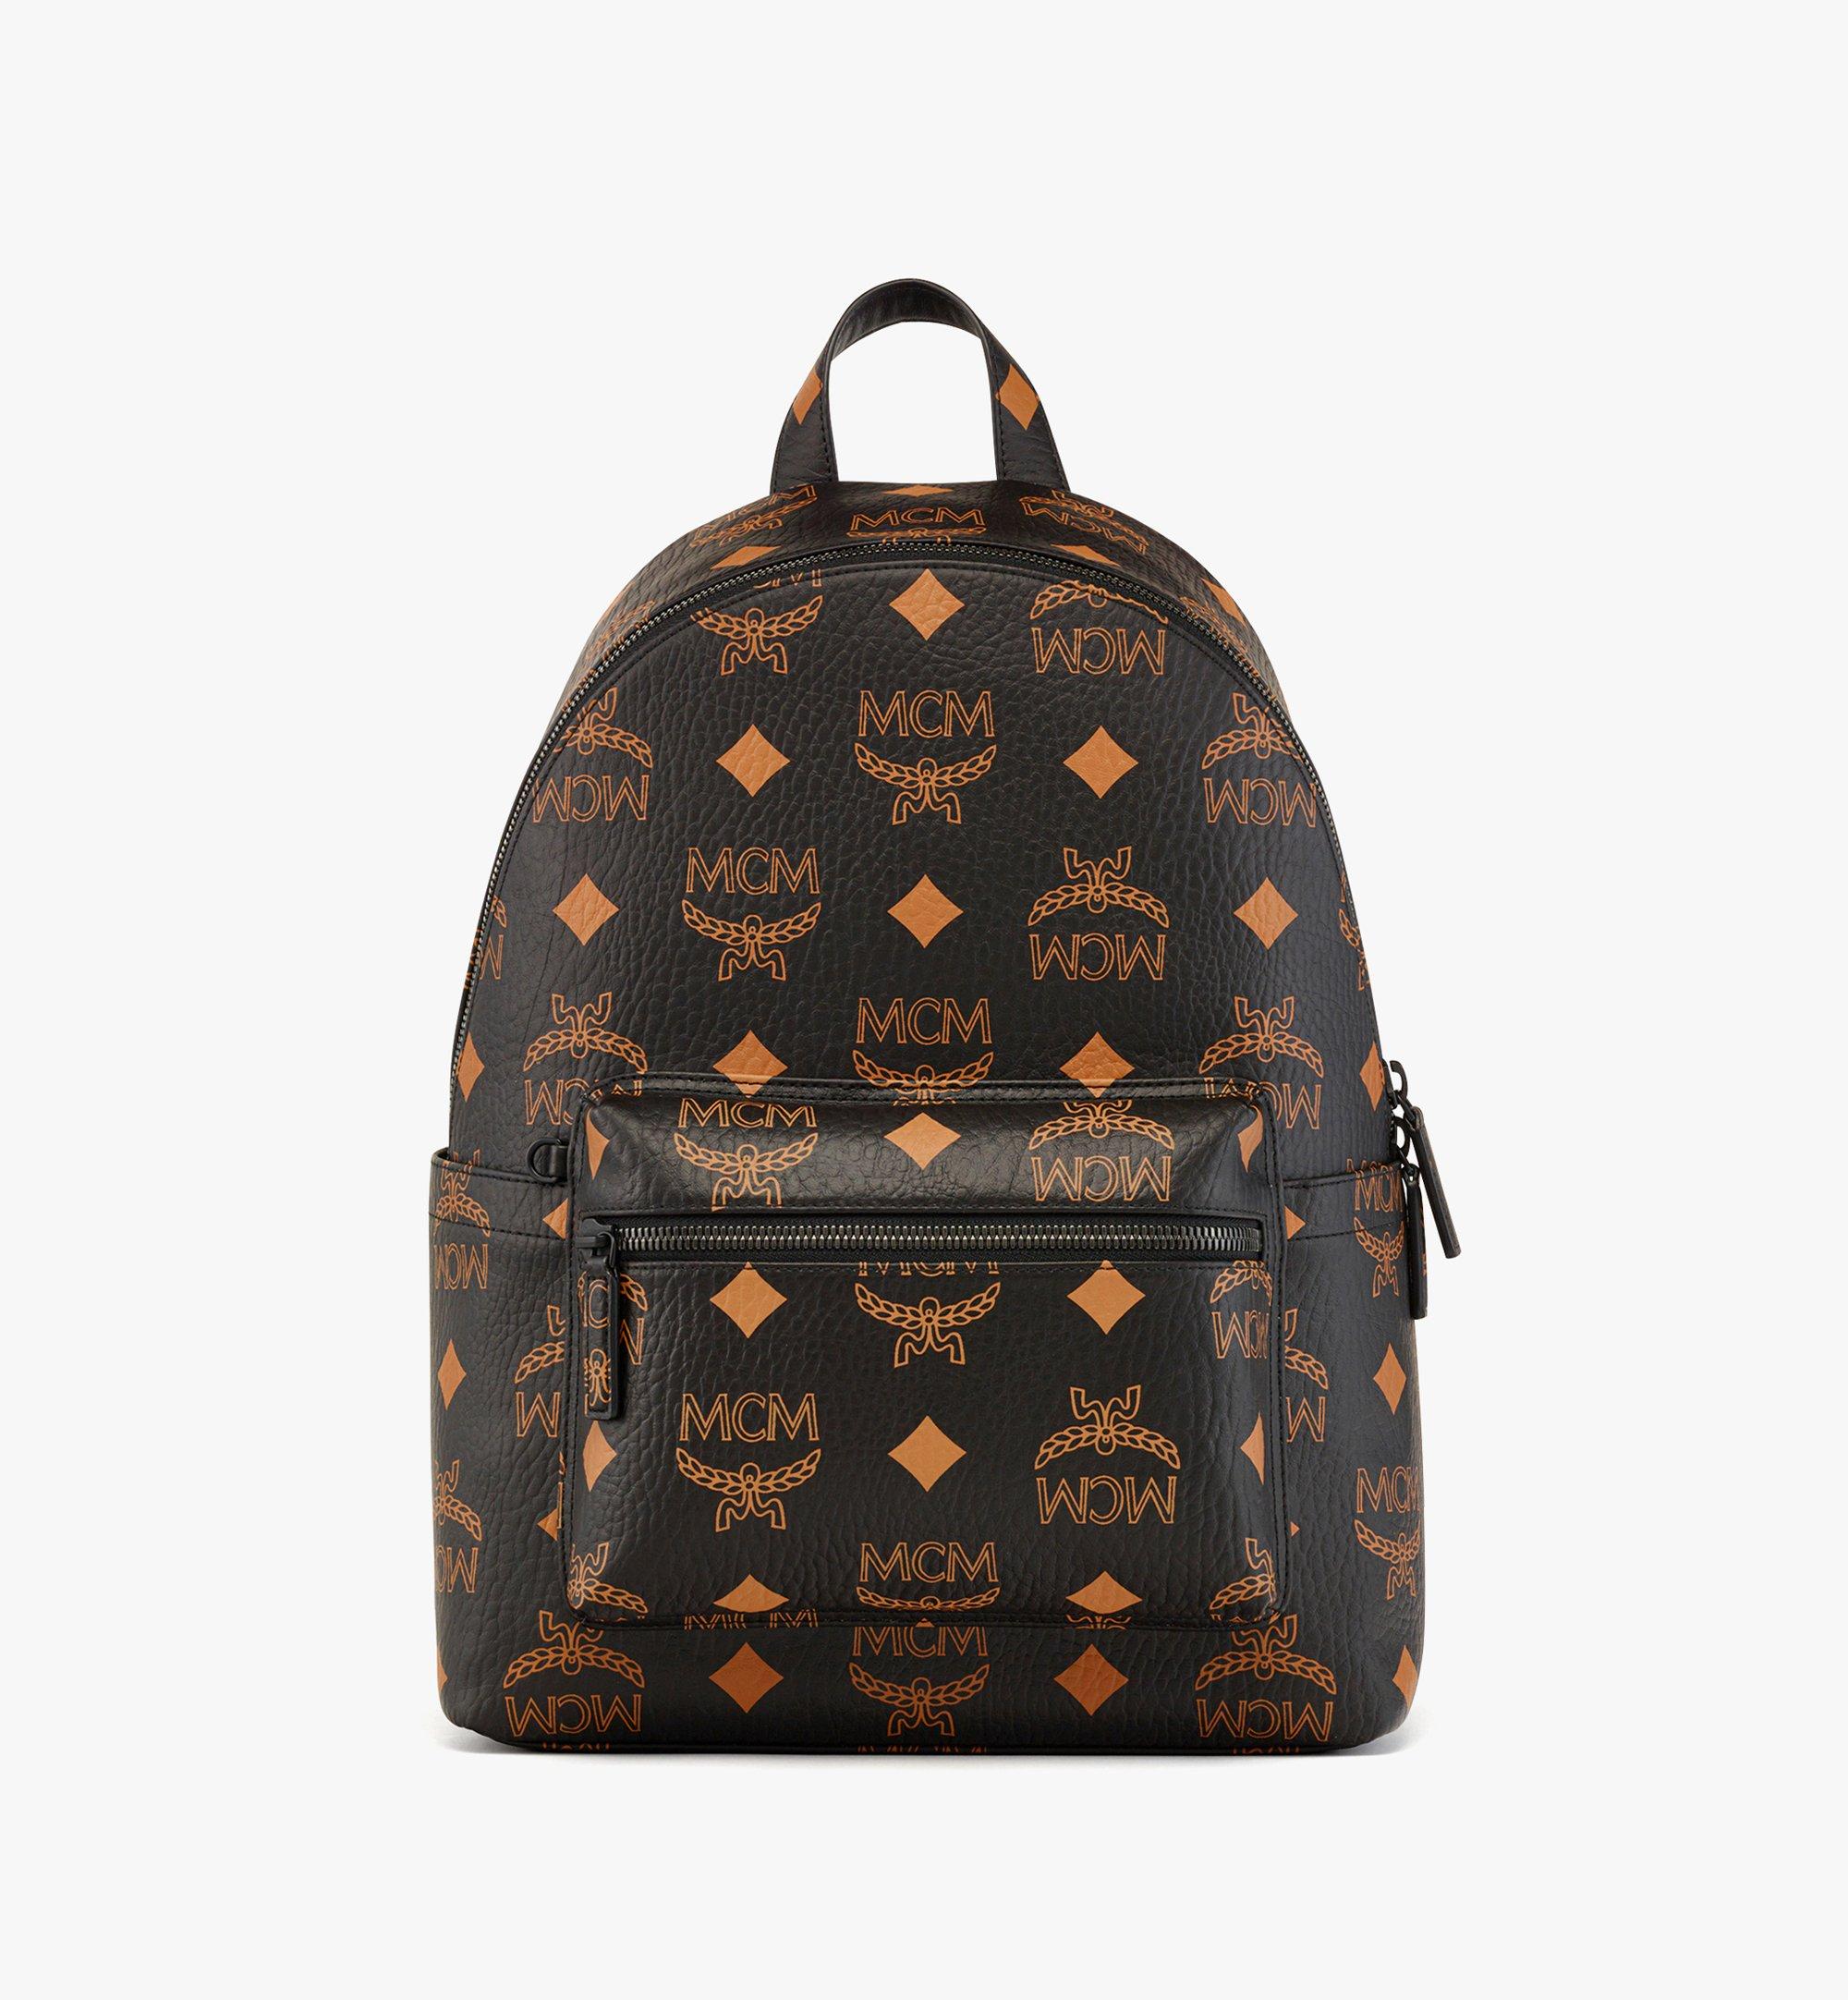 Backpack Designer By Louis Vuitton Size: Large